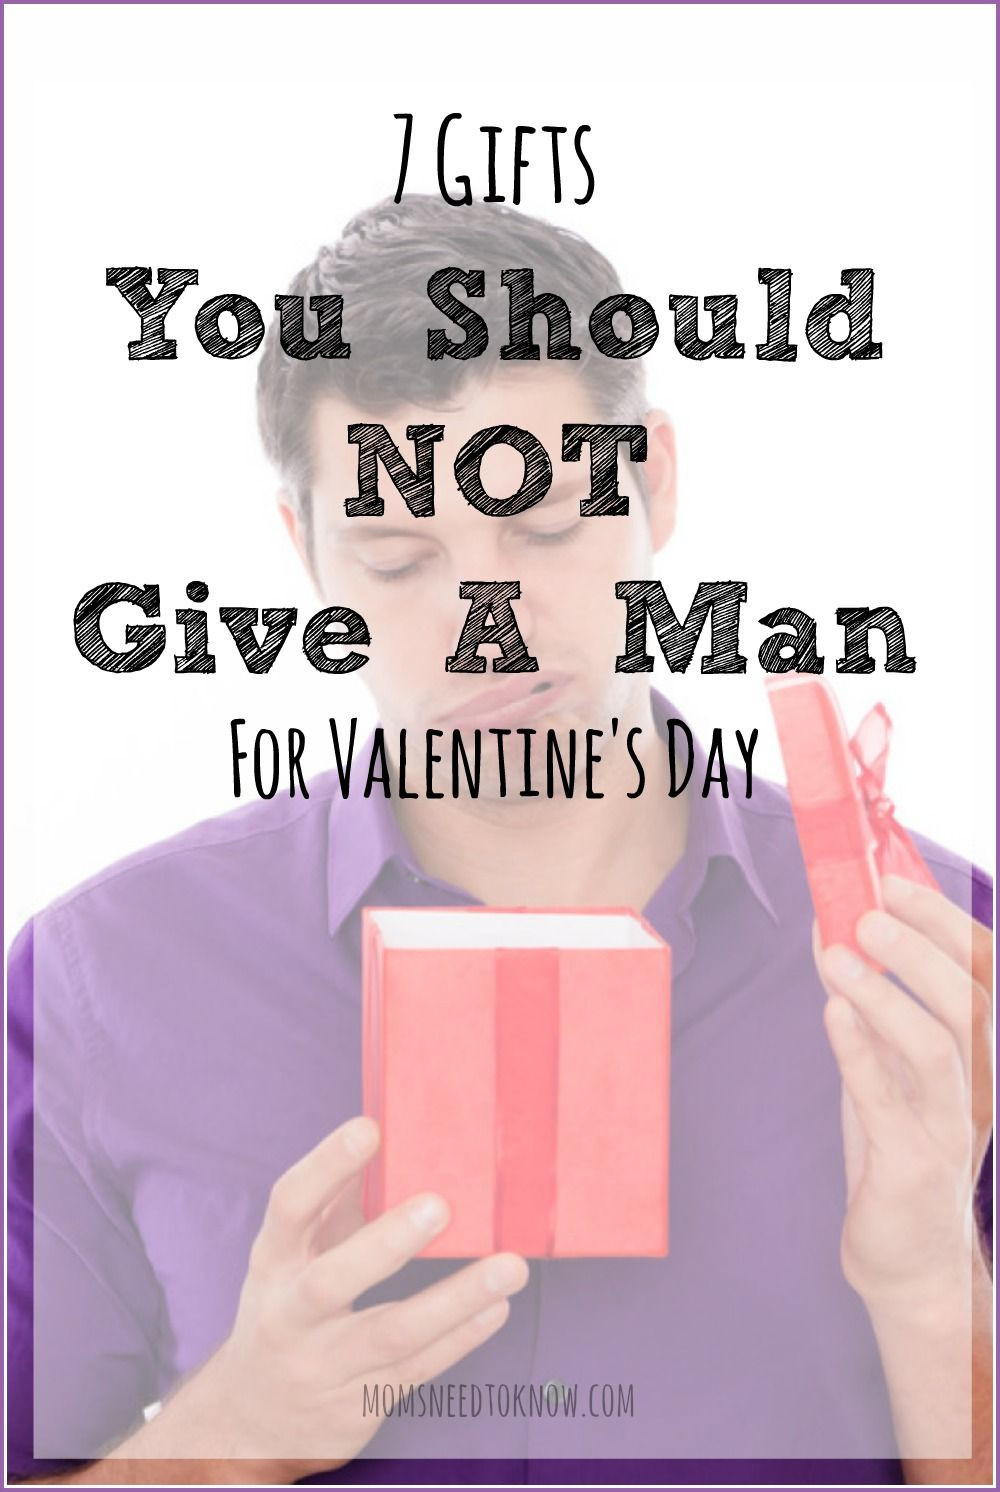 Gifts For Men For Valentines Day
 The 7 Gifts You Should Never Buy a Man For Valentines Day